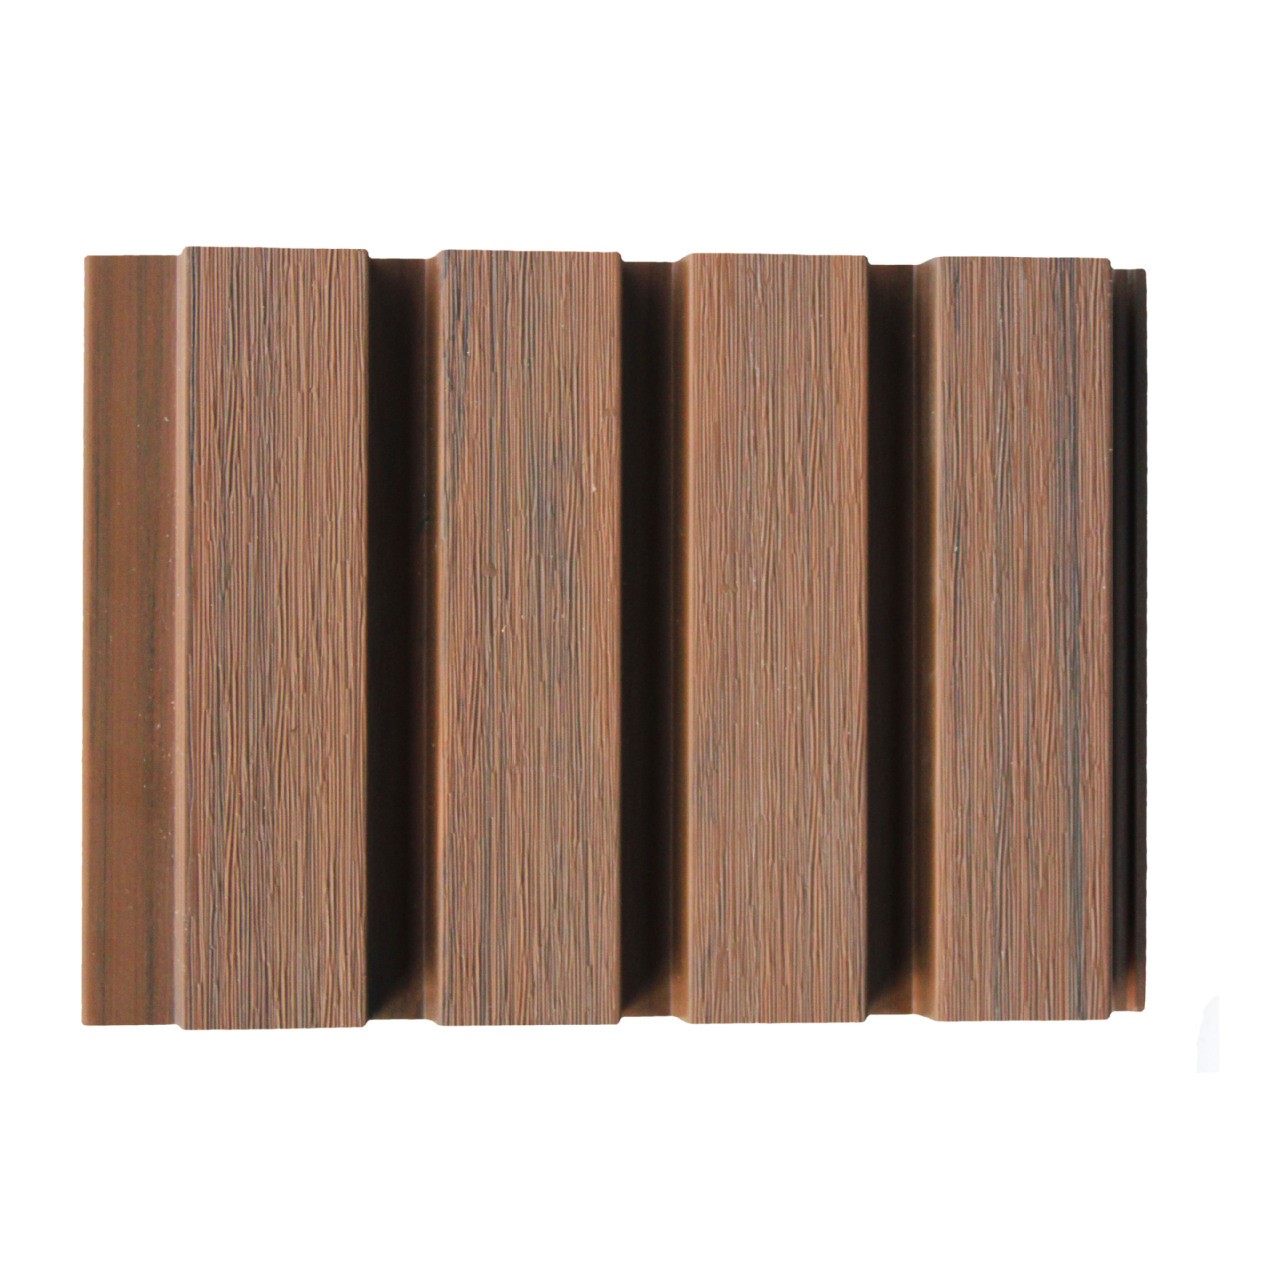 Decorative Noise Absorbing Texture Wood Slats Wall Panel Padding For Walls